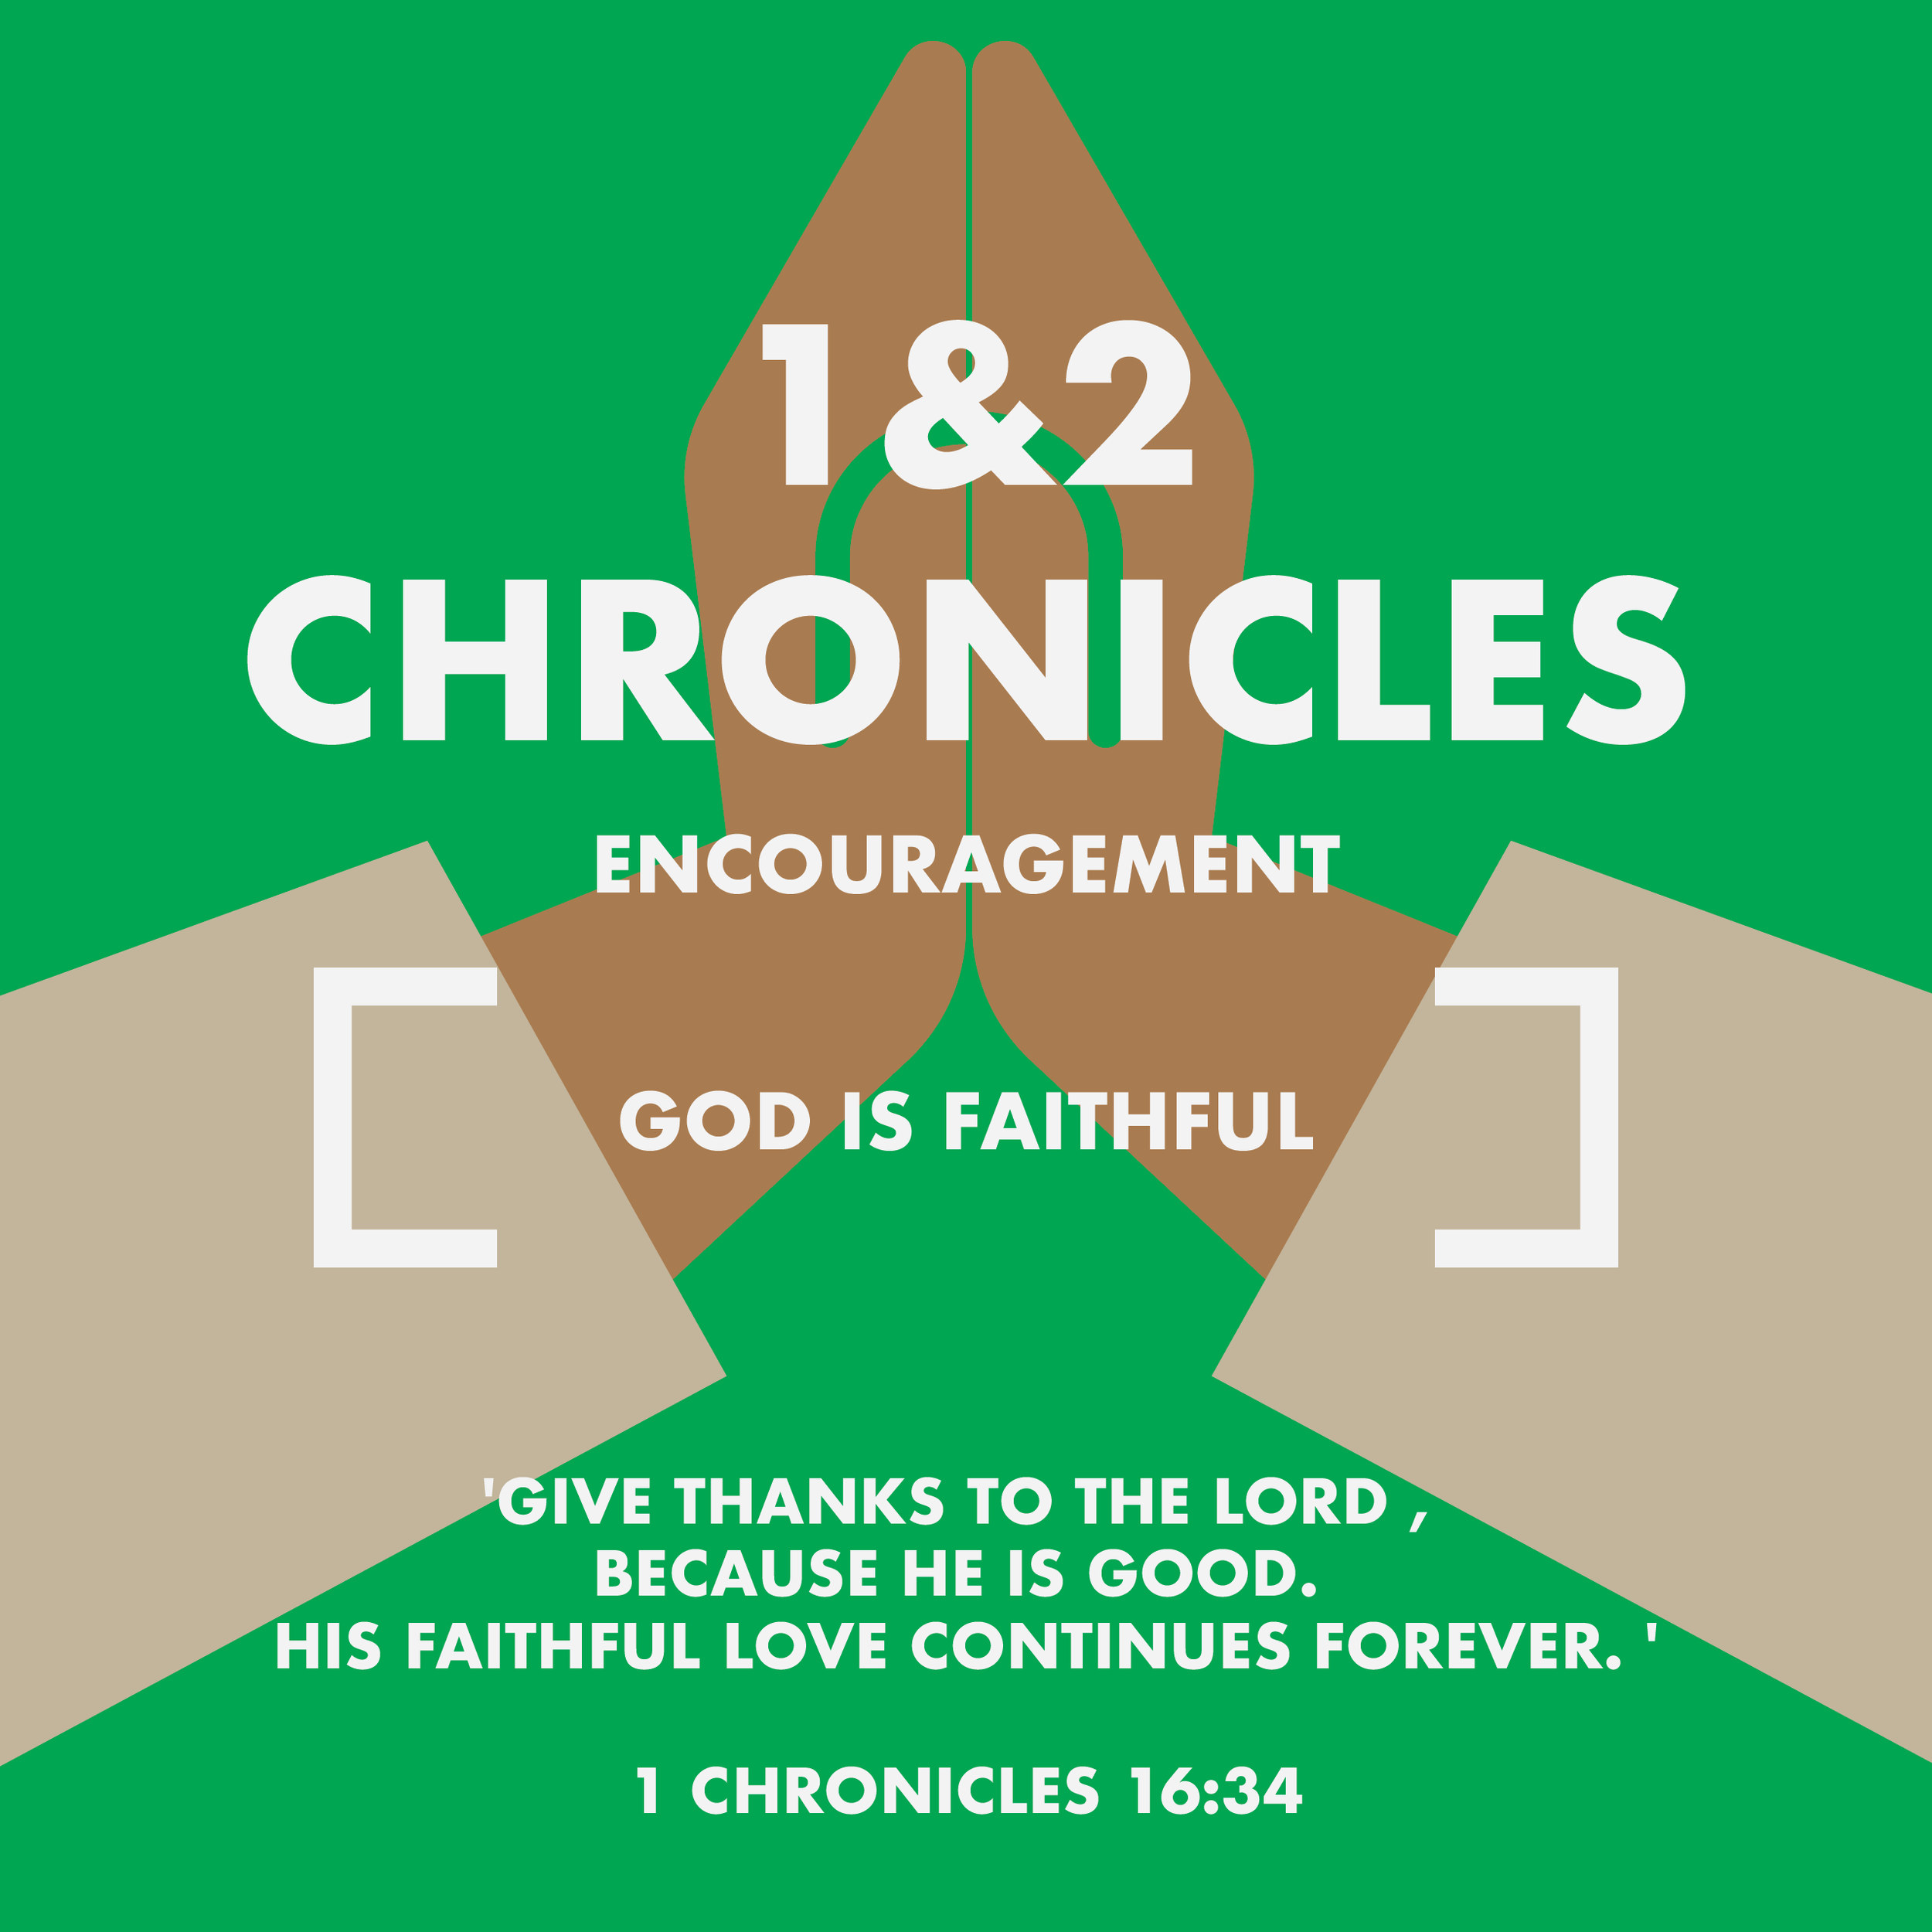 Books of the Bible_posters_12 1&2 Chronicles.png